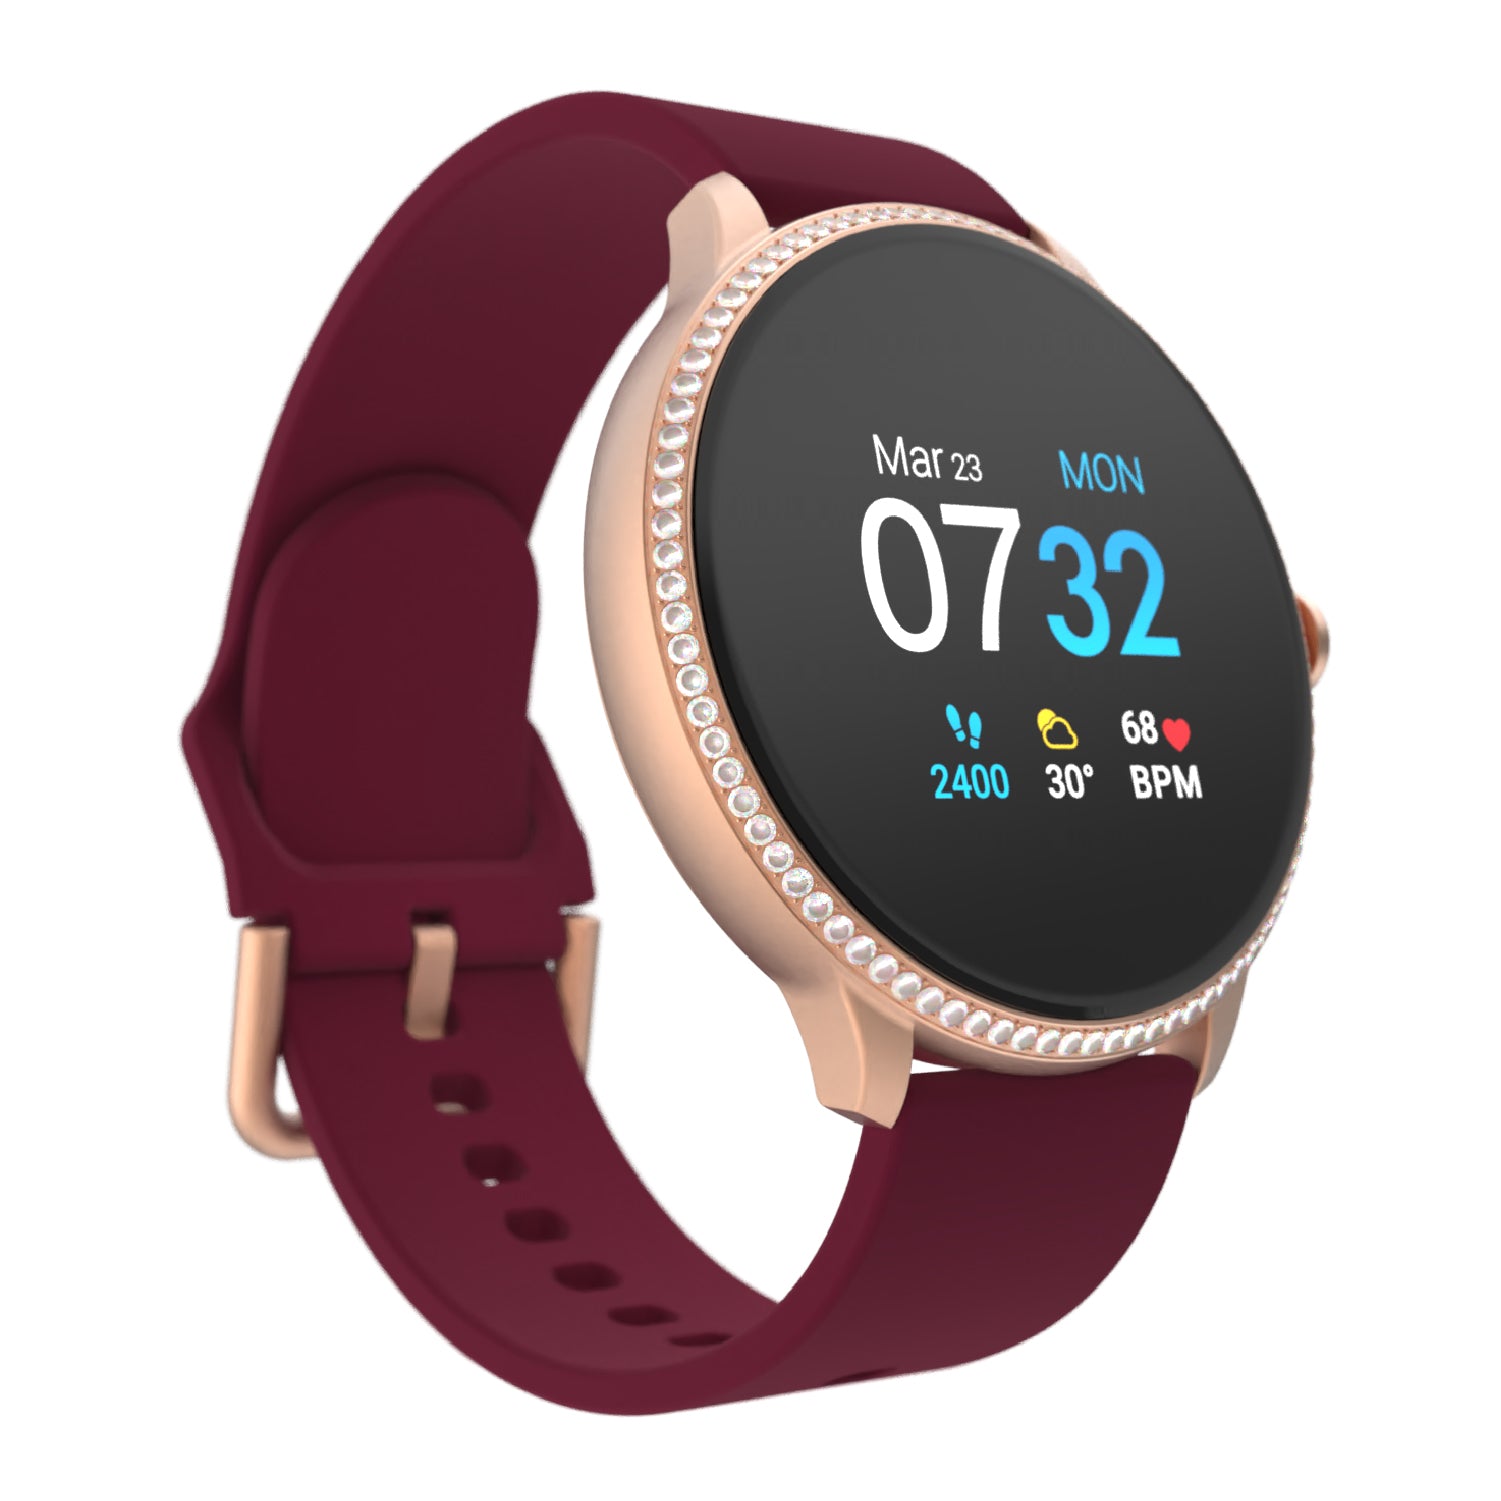 iTouch Sport 3 Smartwatch in Rose Gold Crystal with Merlot Strap